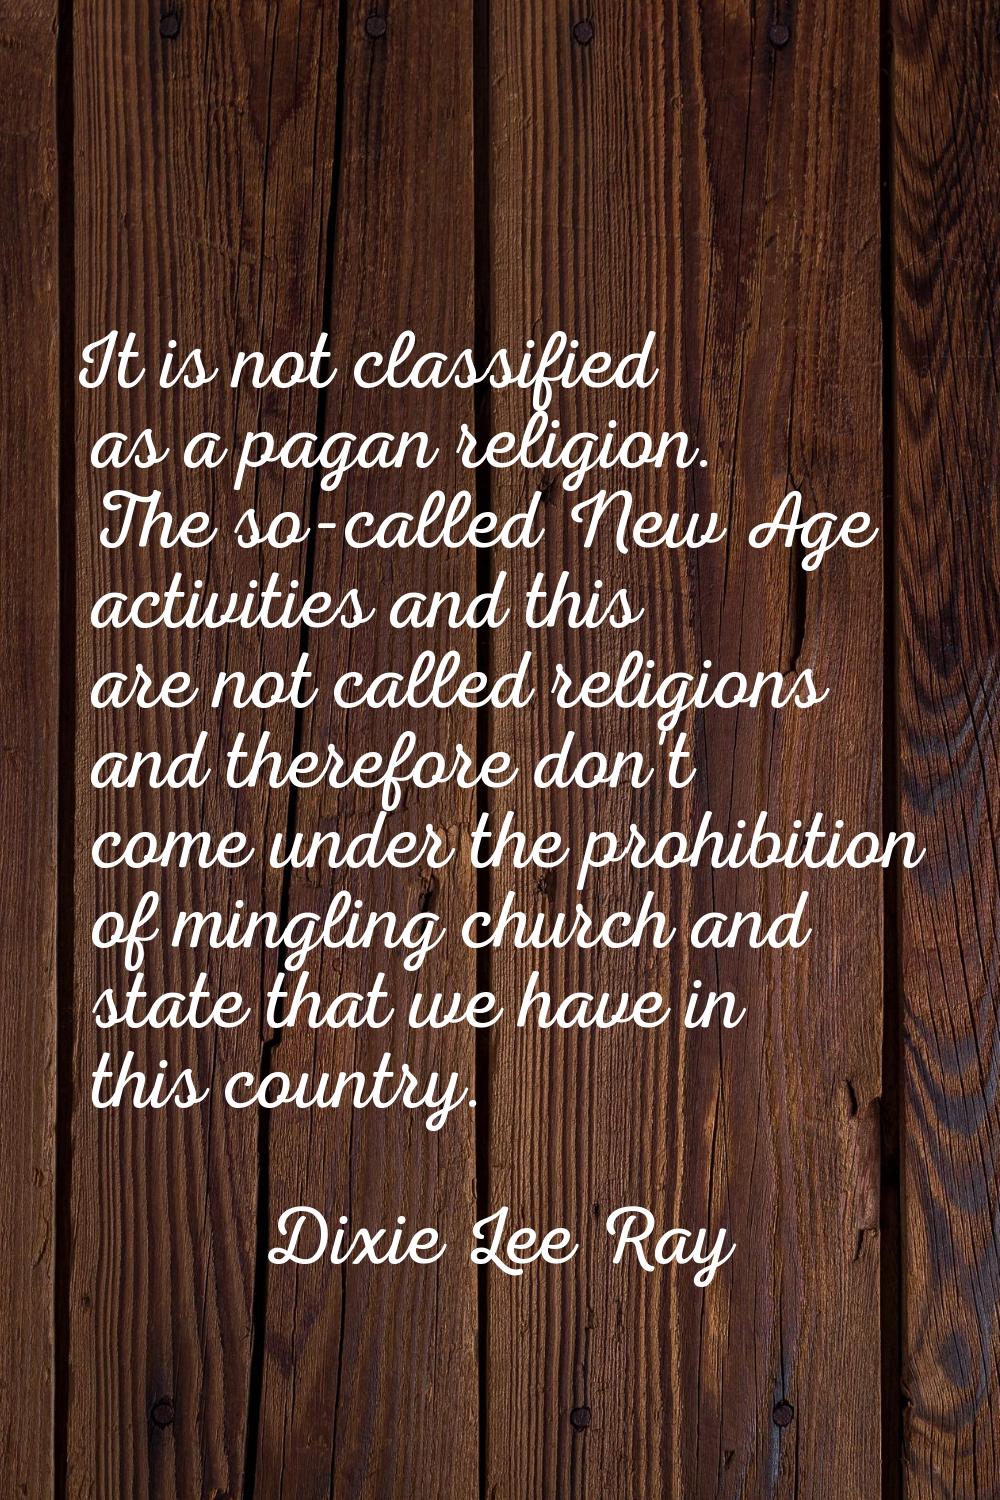 It is not classified as a pagan religion. The so-called New Age activities and this are not called 